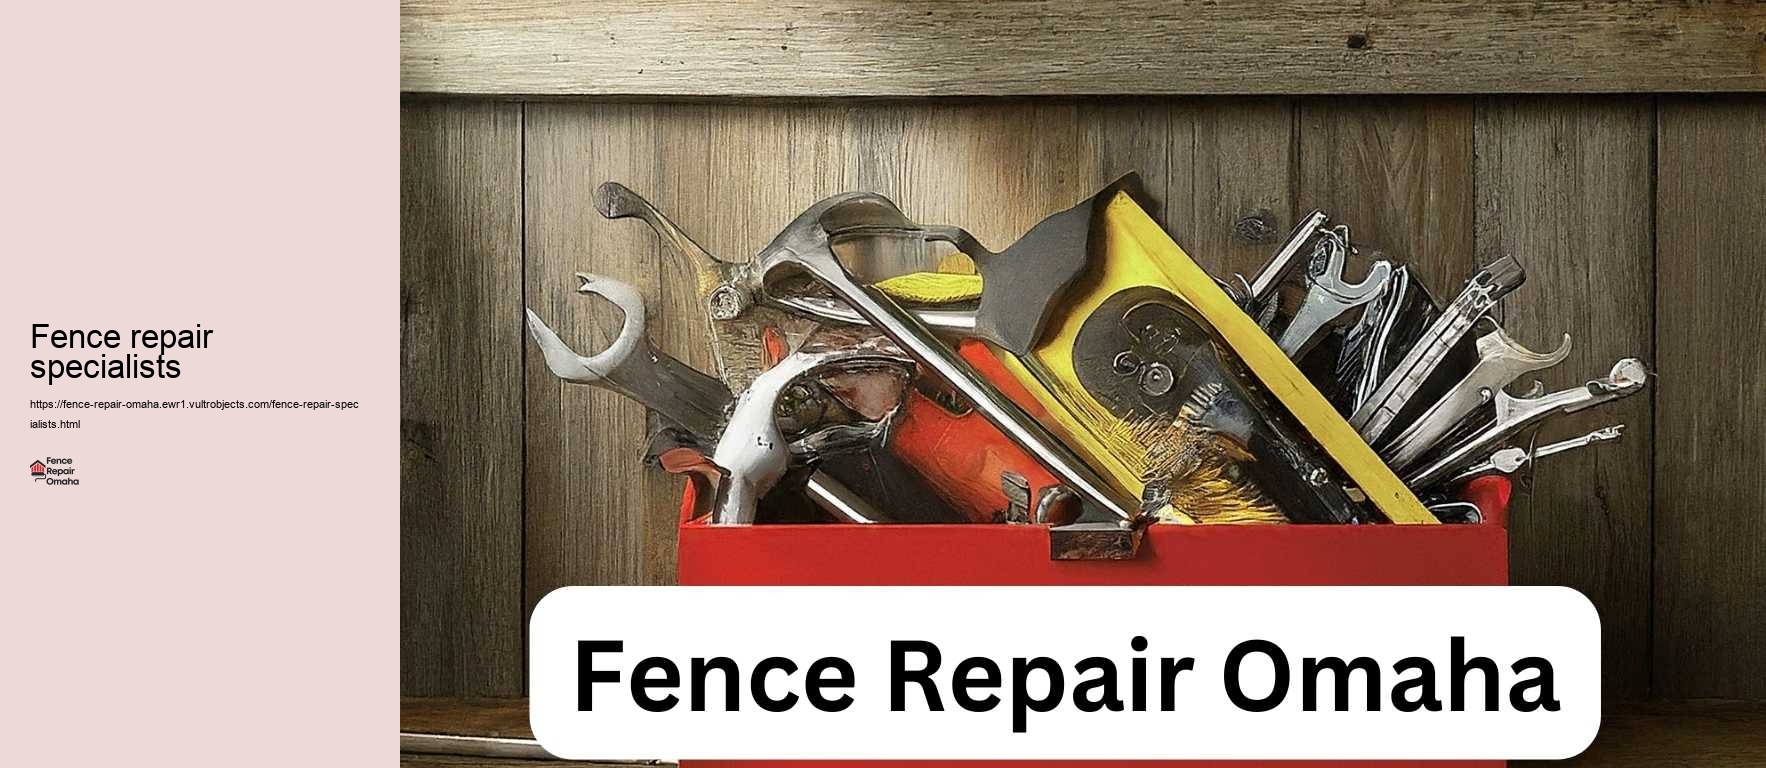 Fence repair specialists